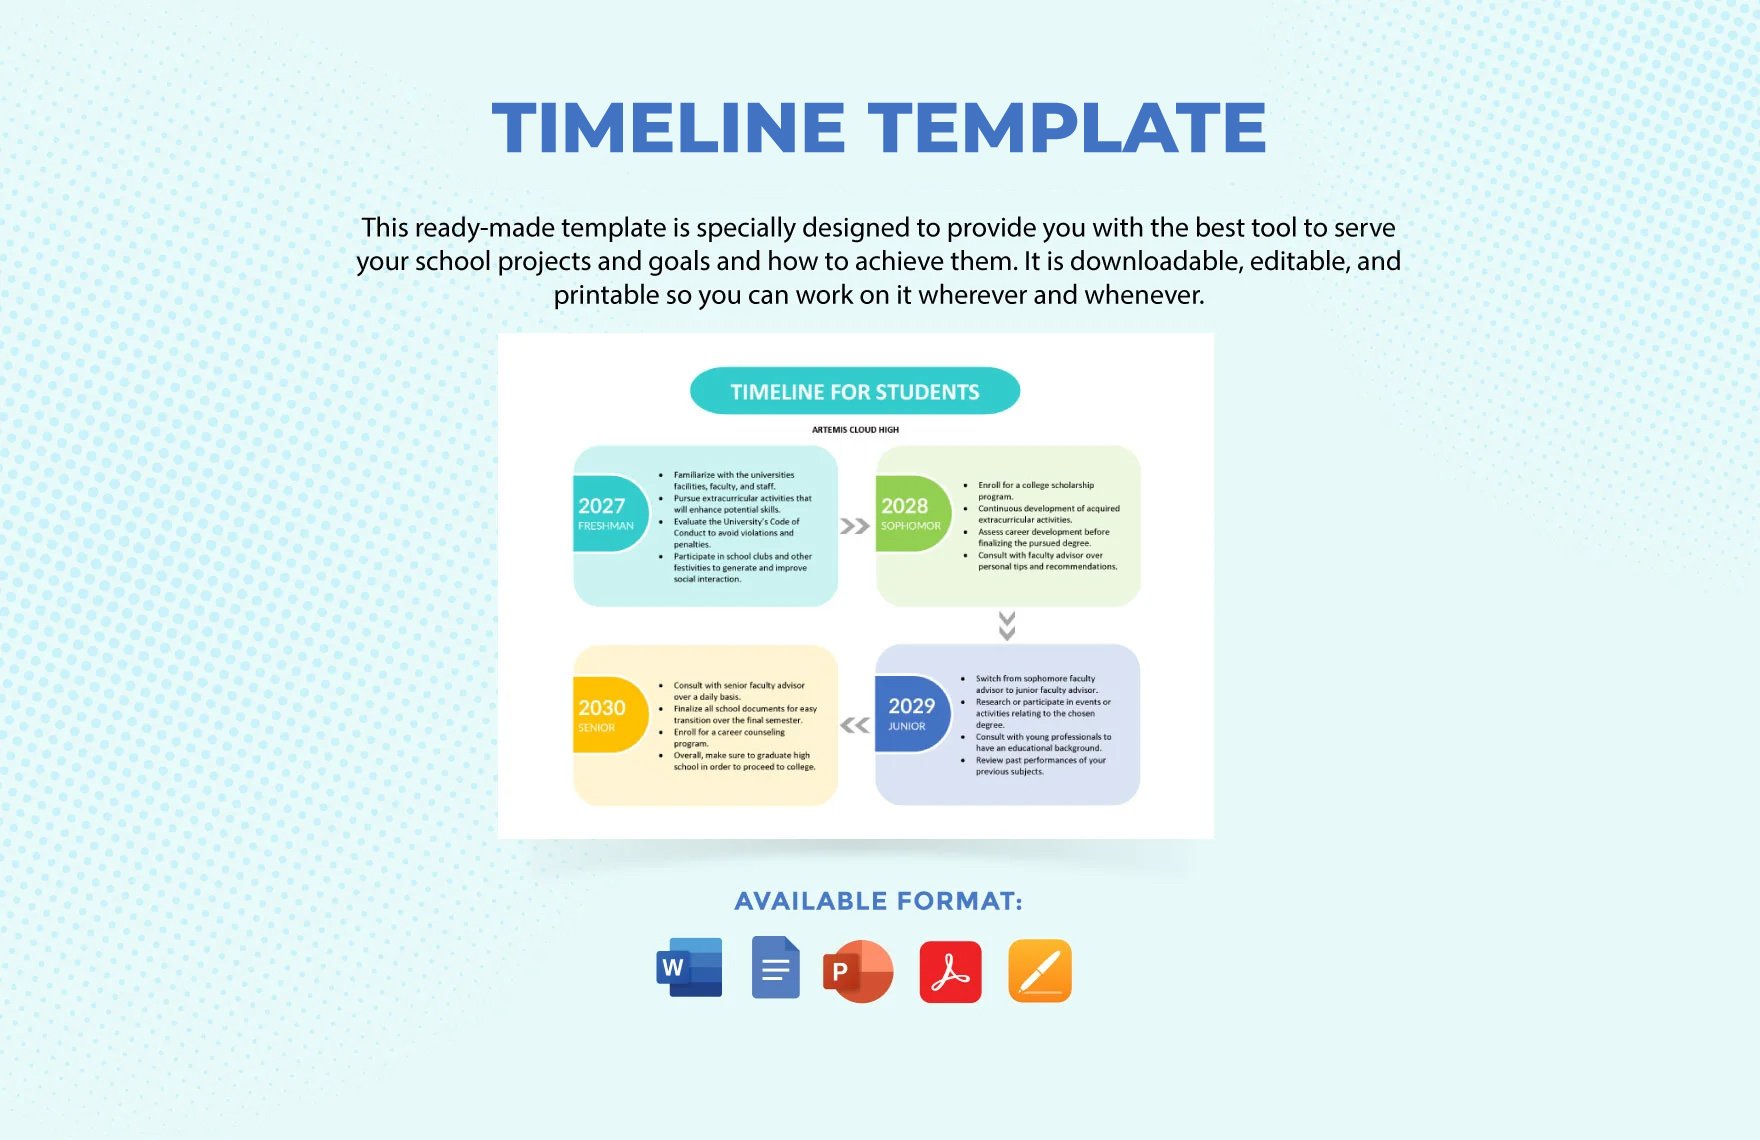 Free Timeline Template For Students in Word, Google Docs, PDF, Apple Pages, PowerPoint